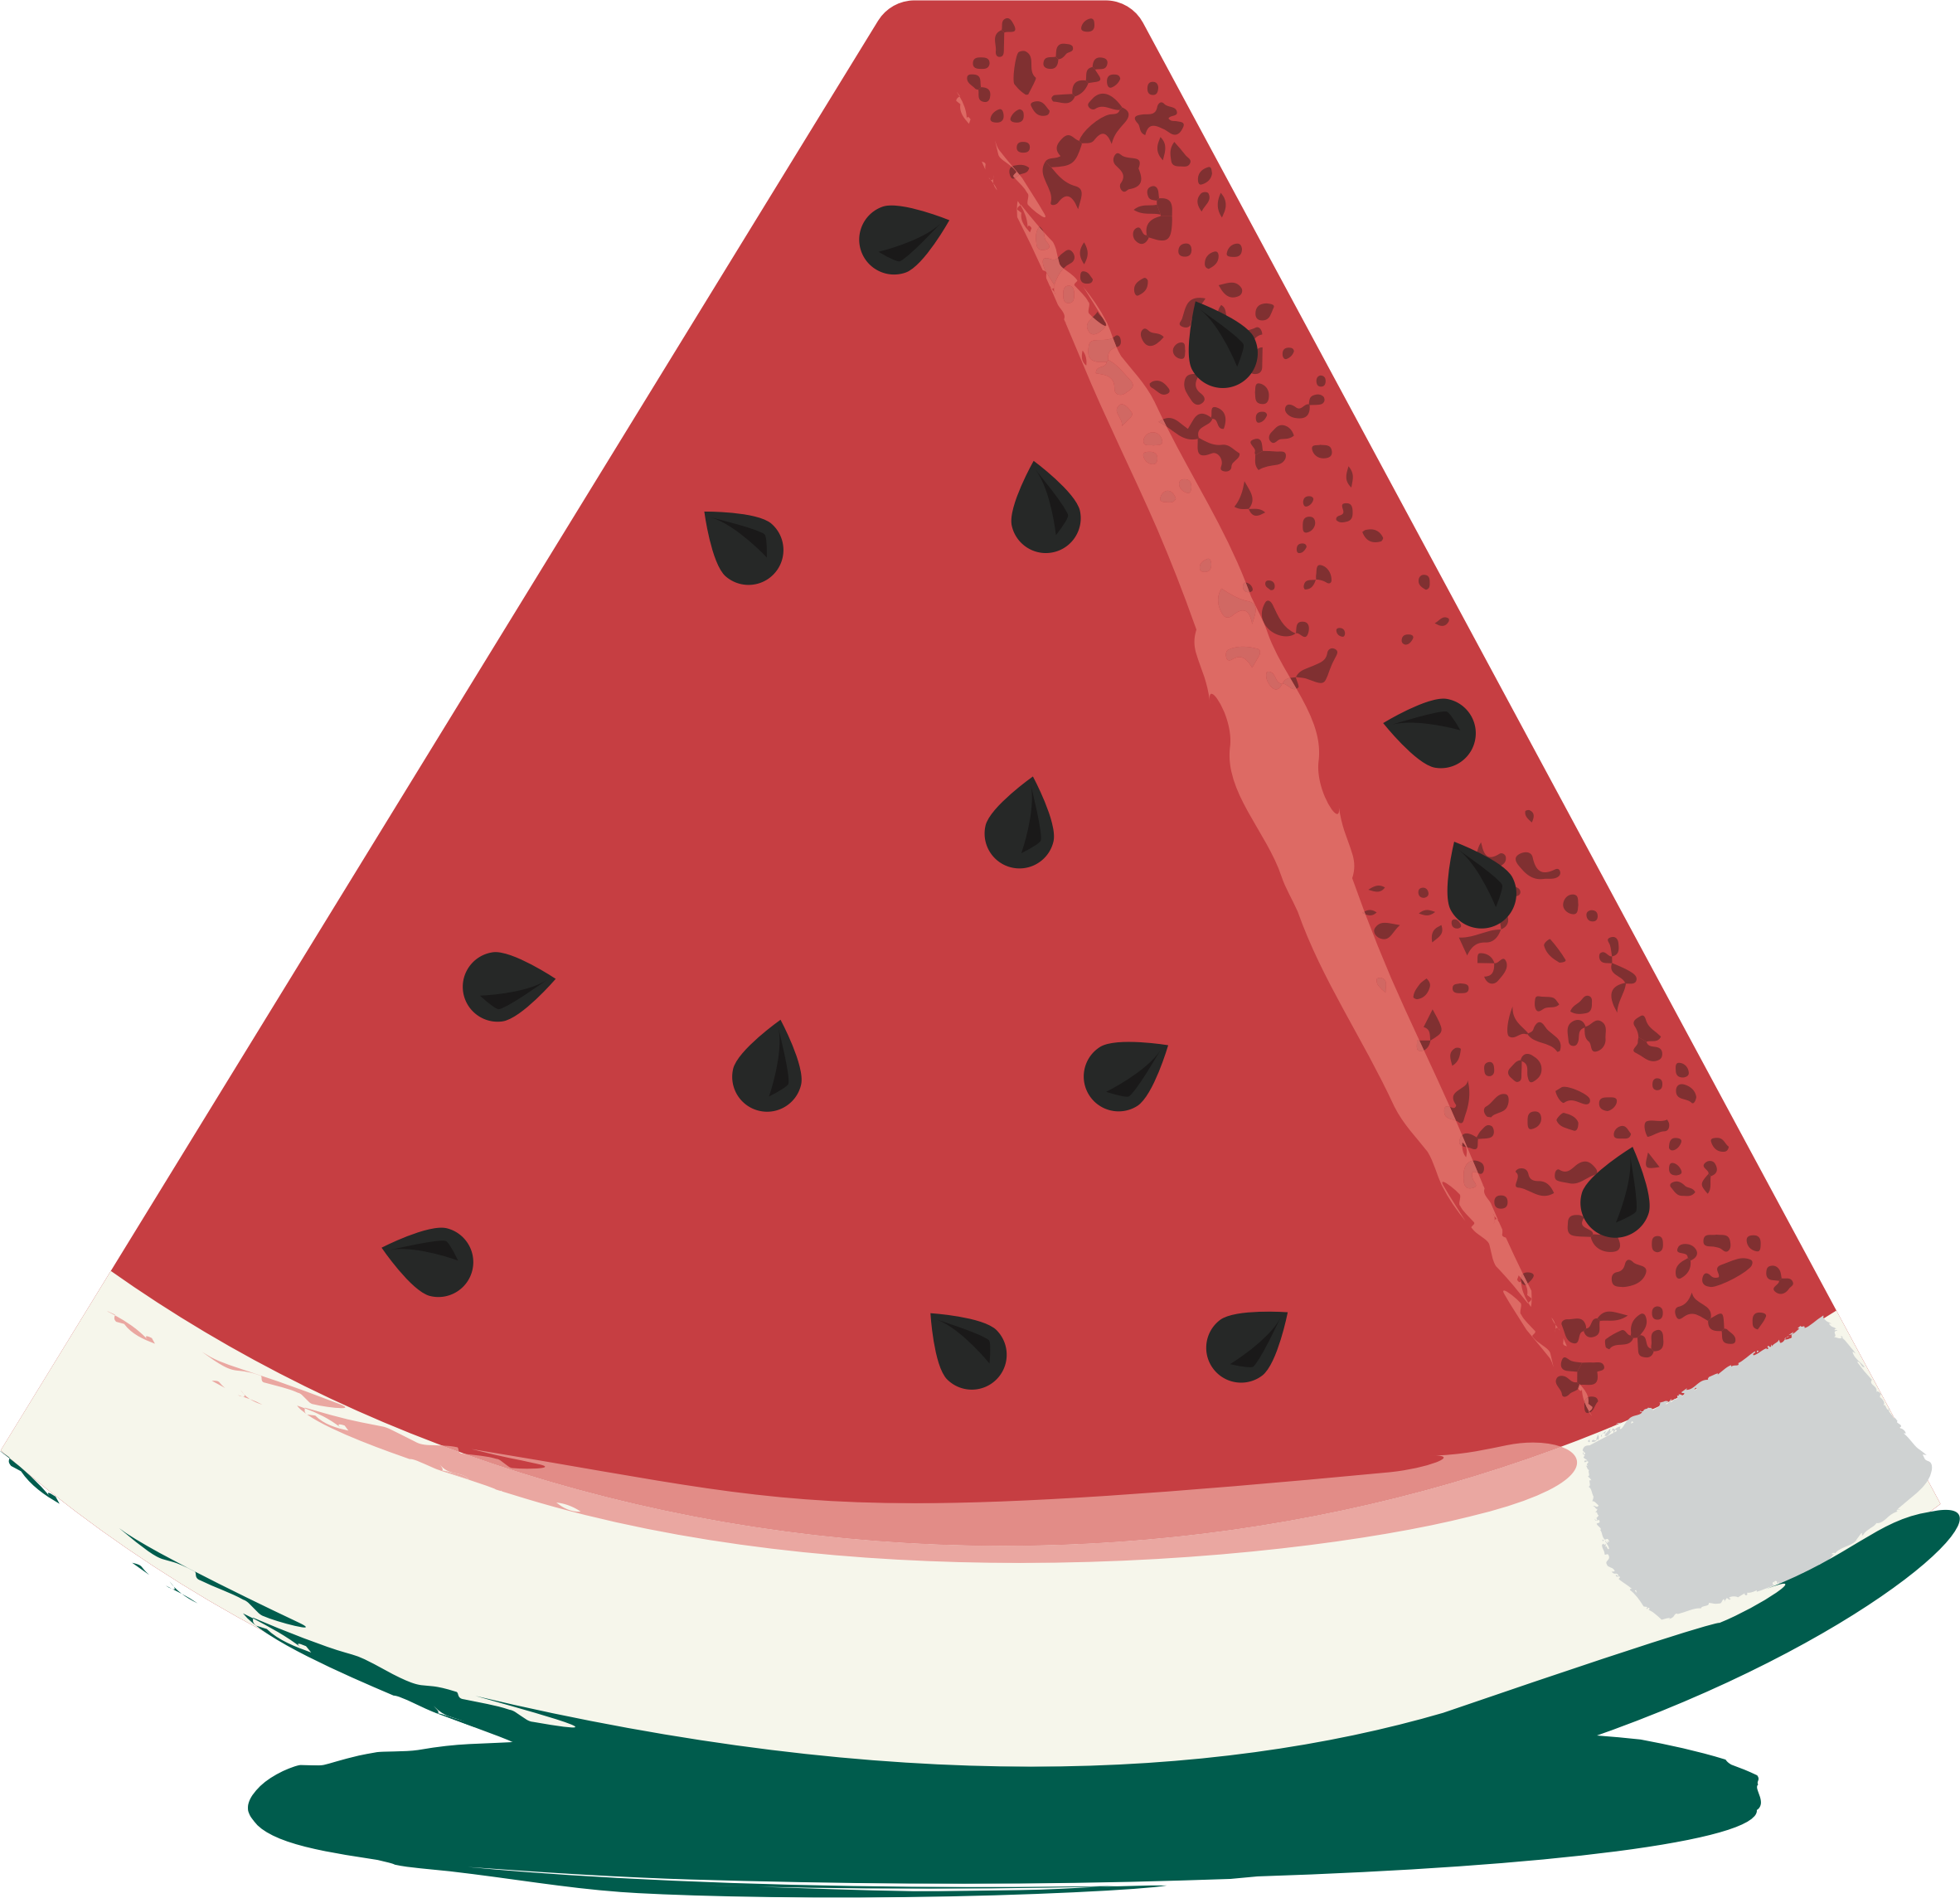 Slice clip art images. Watermelon clipart triangular object